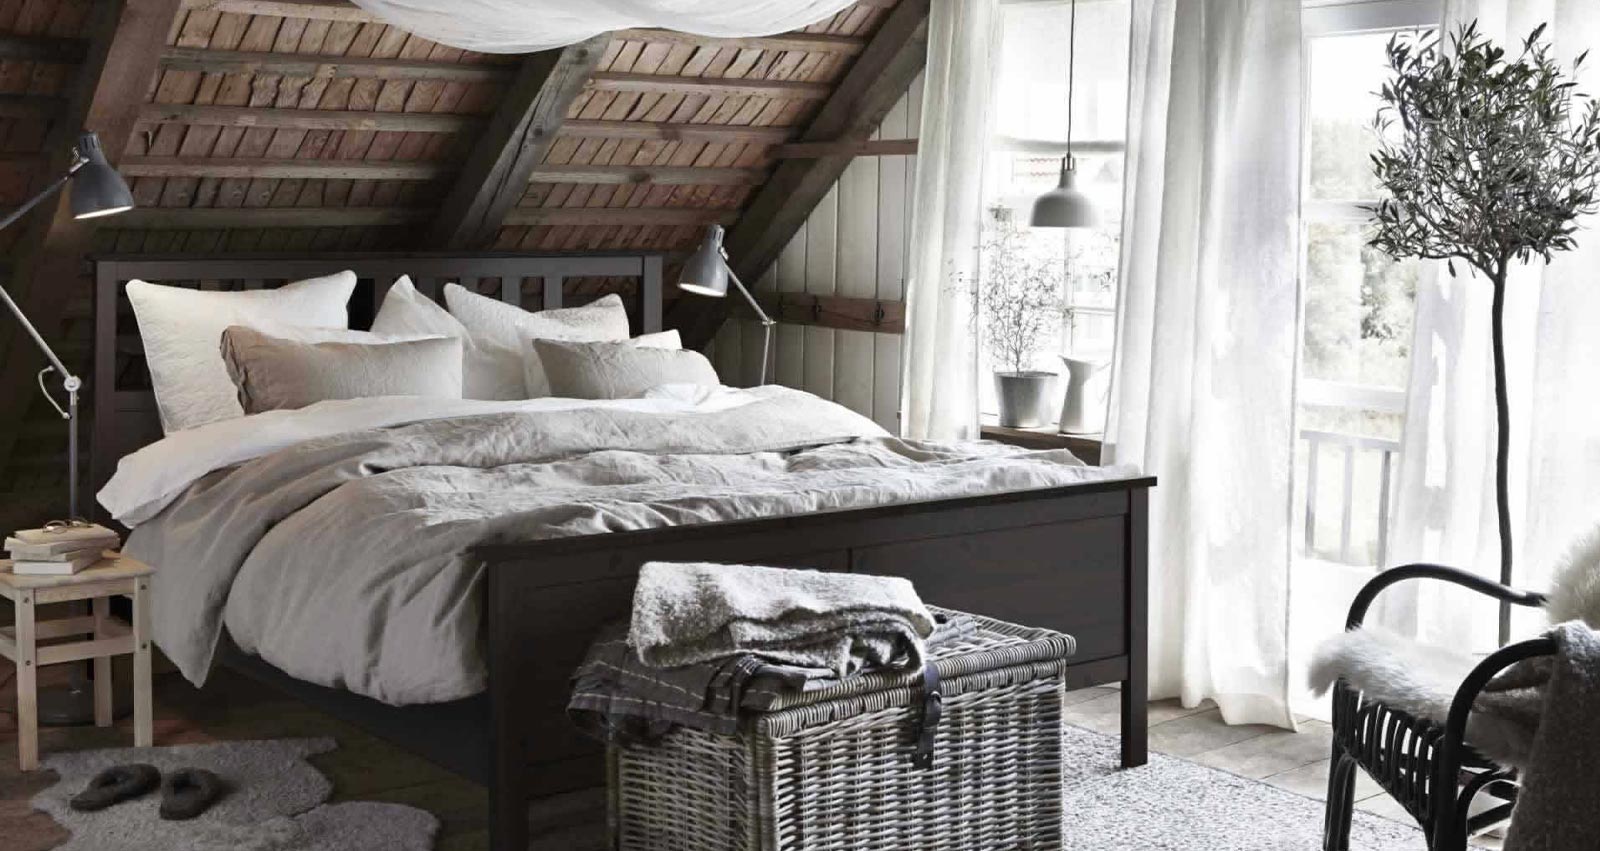 IKEA-Cosy bedroom tips relax with natural materials 01y